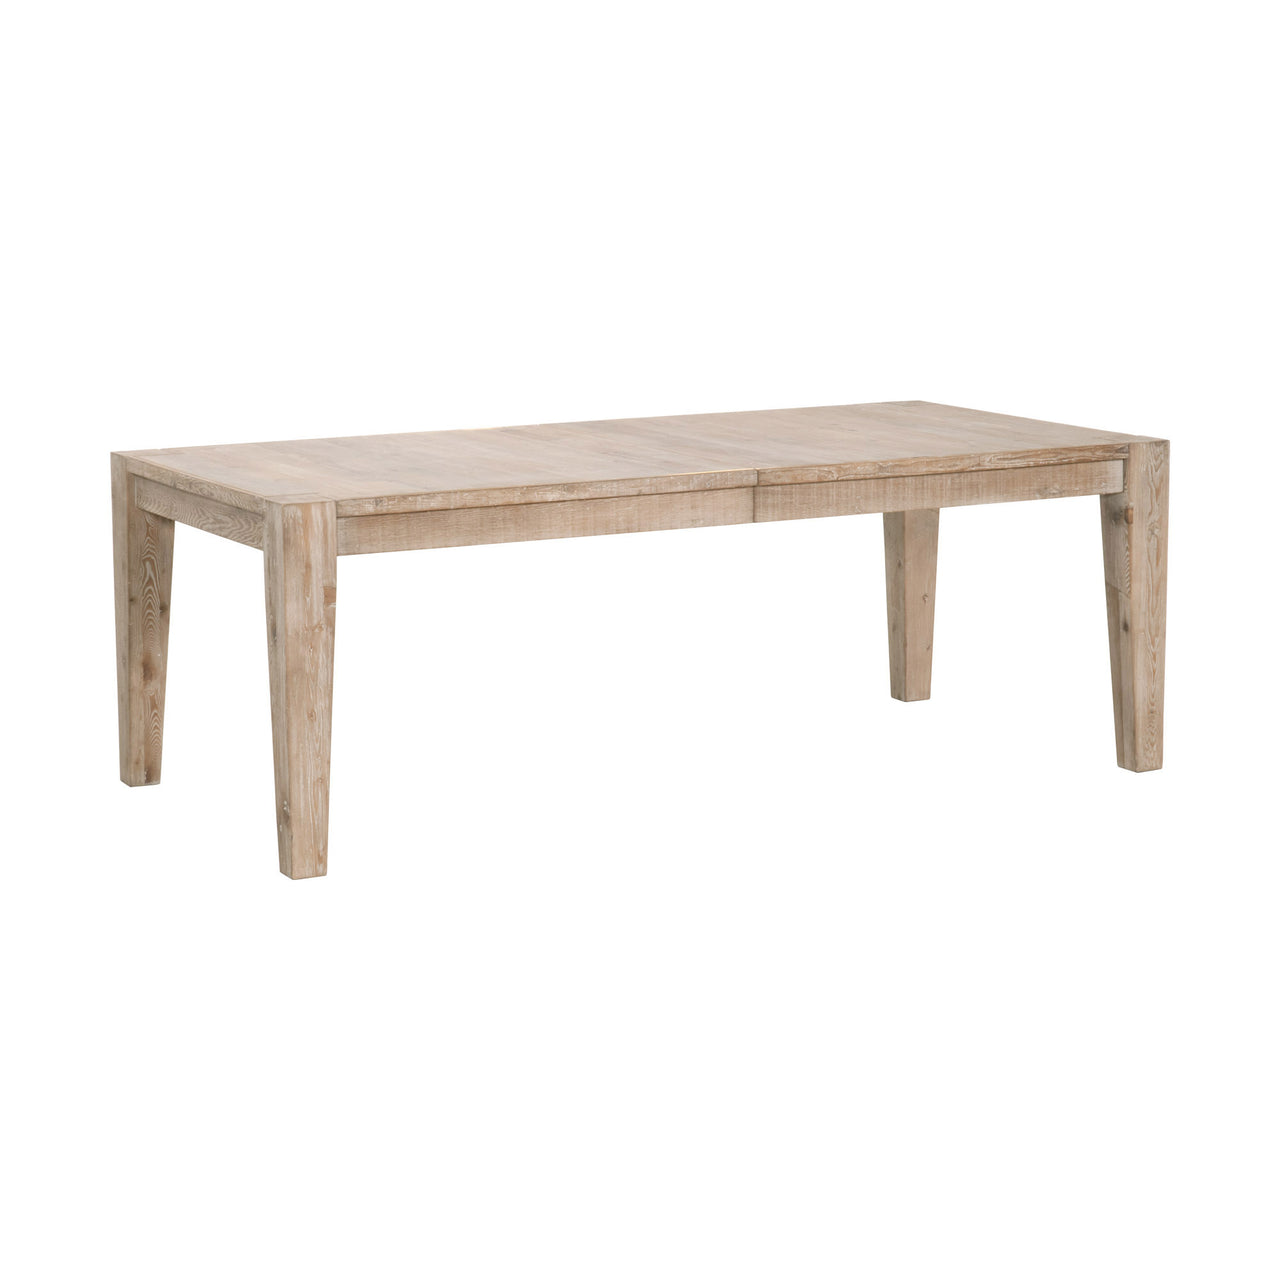 Avalon Extension Dining Table